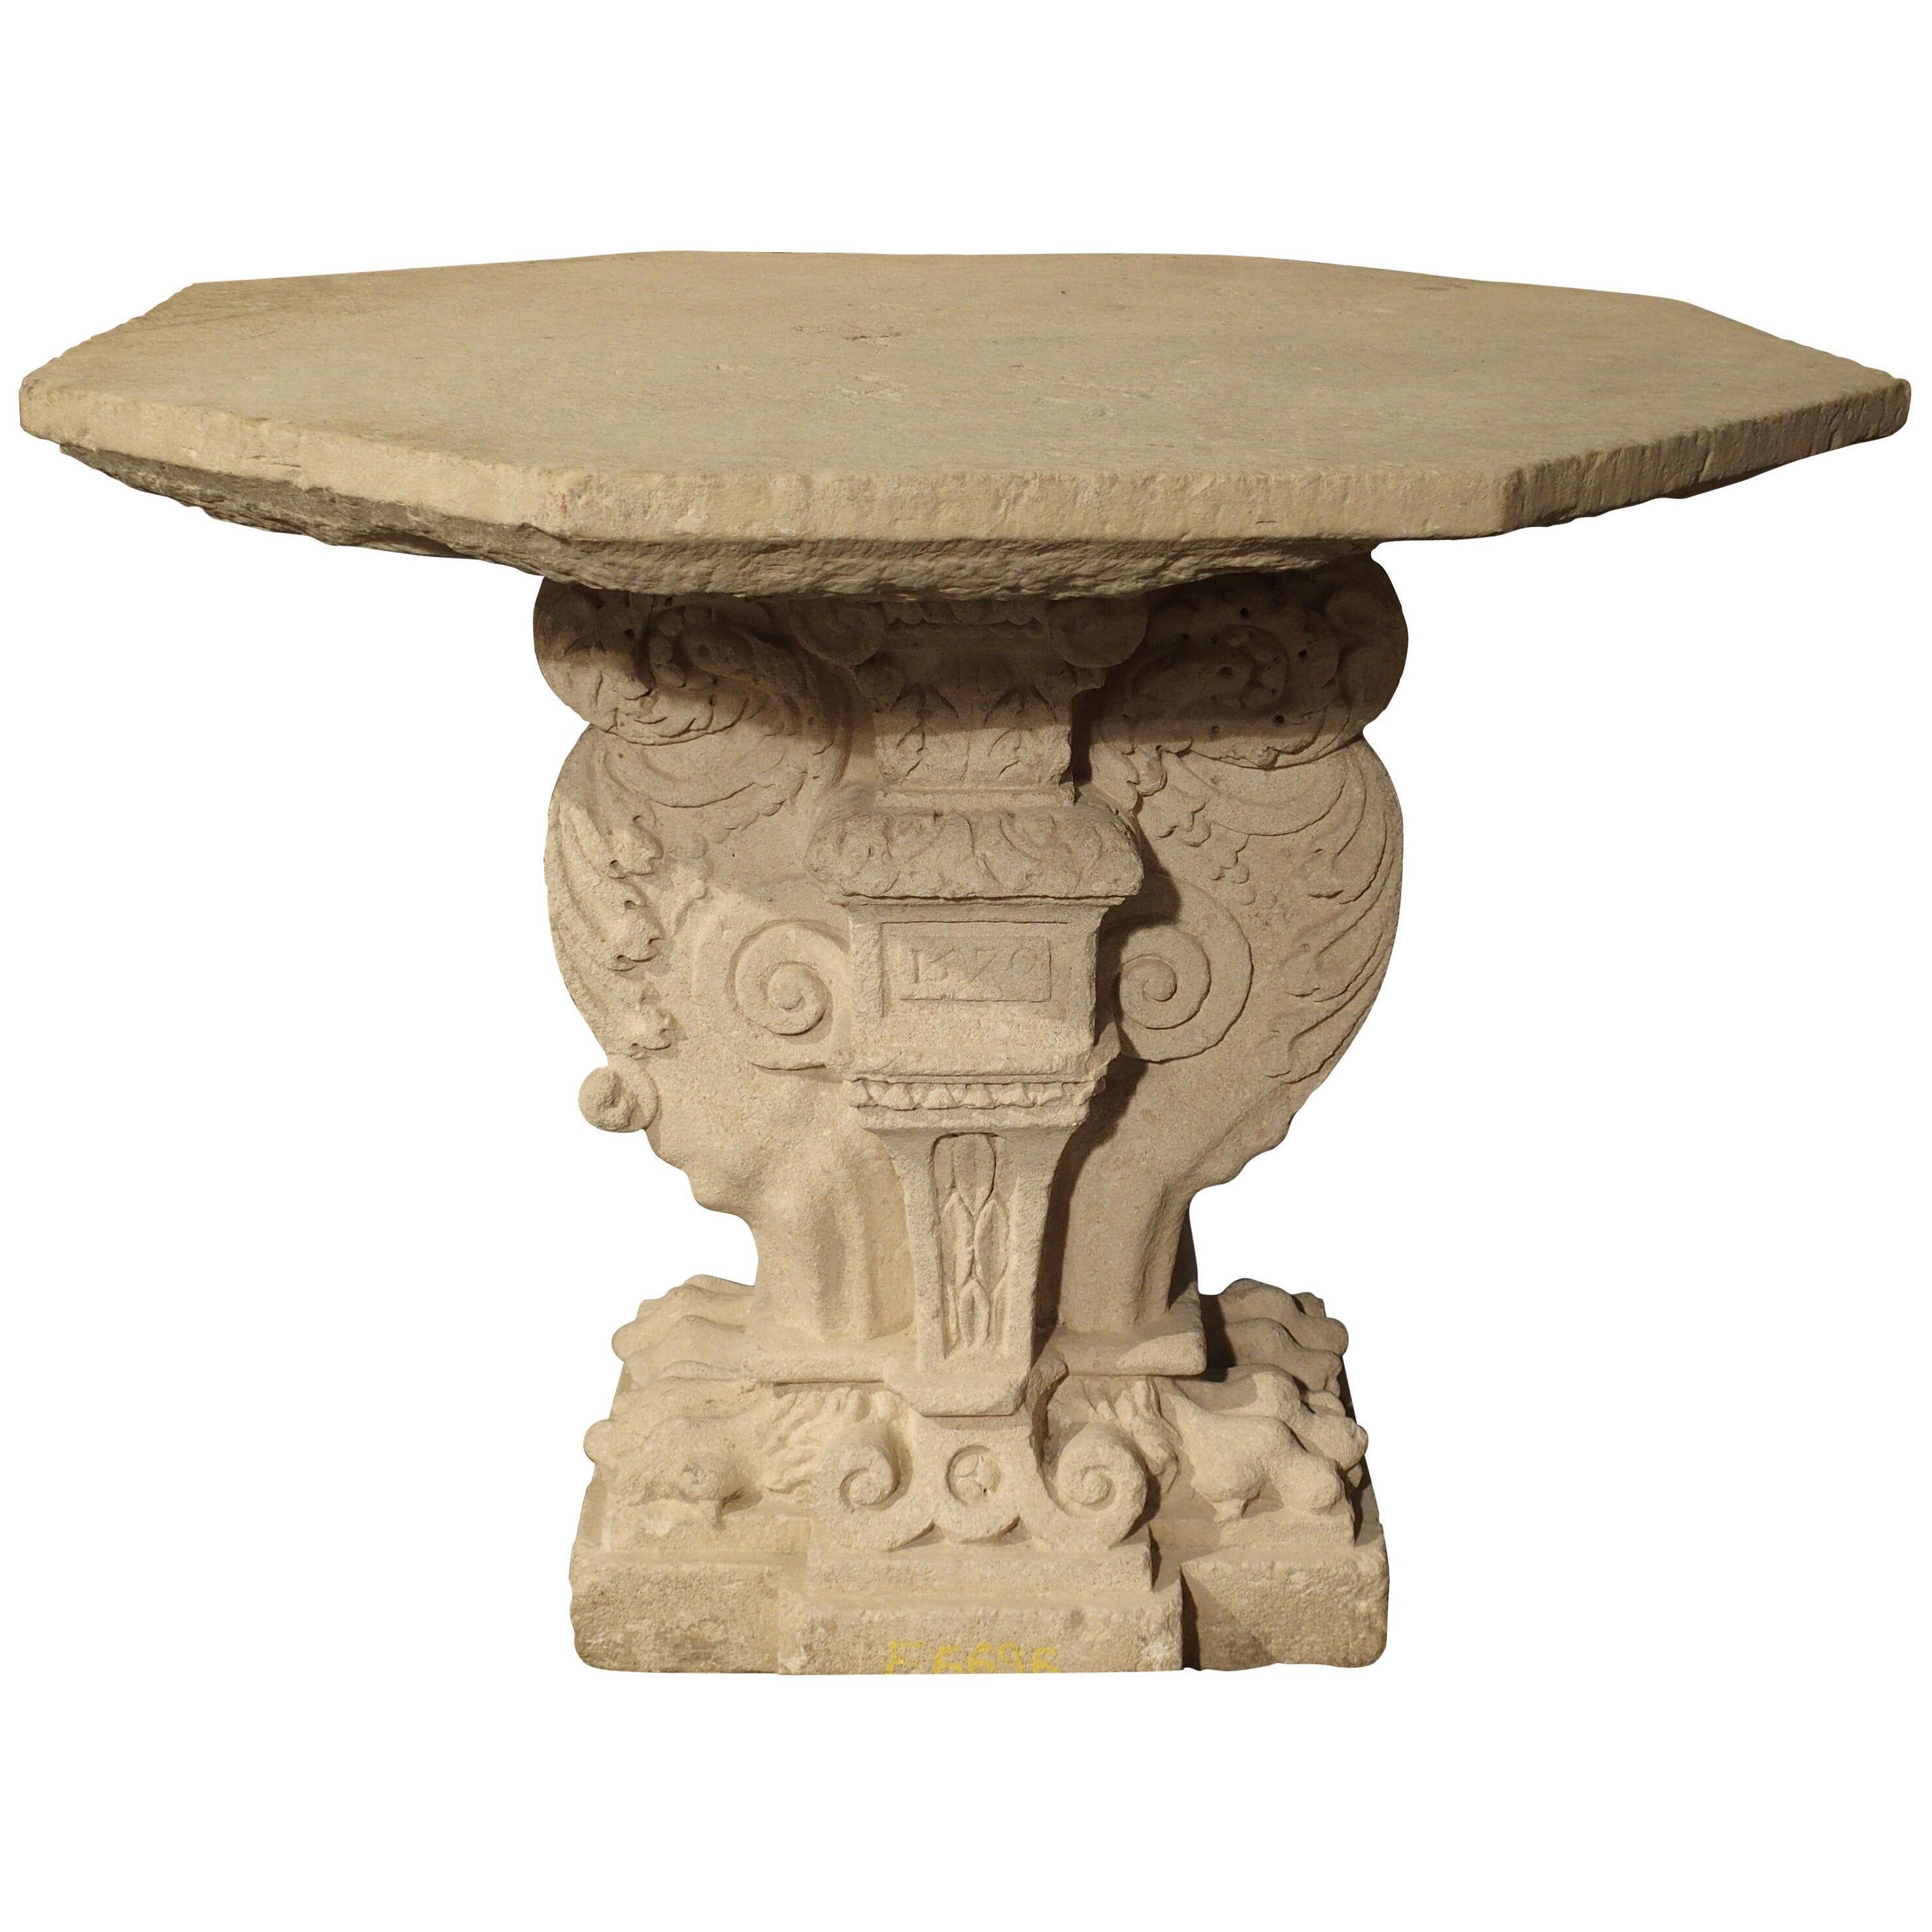 Rare Period Renaissance Stone Table from the South of France